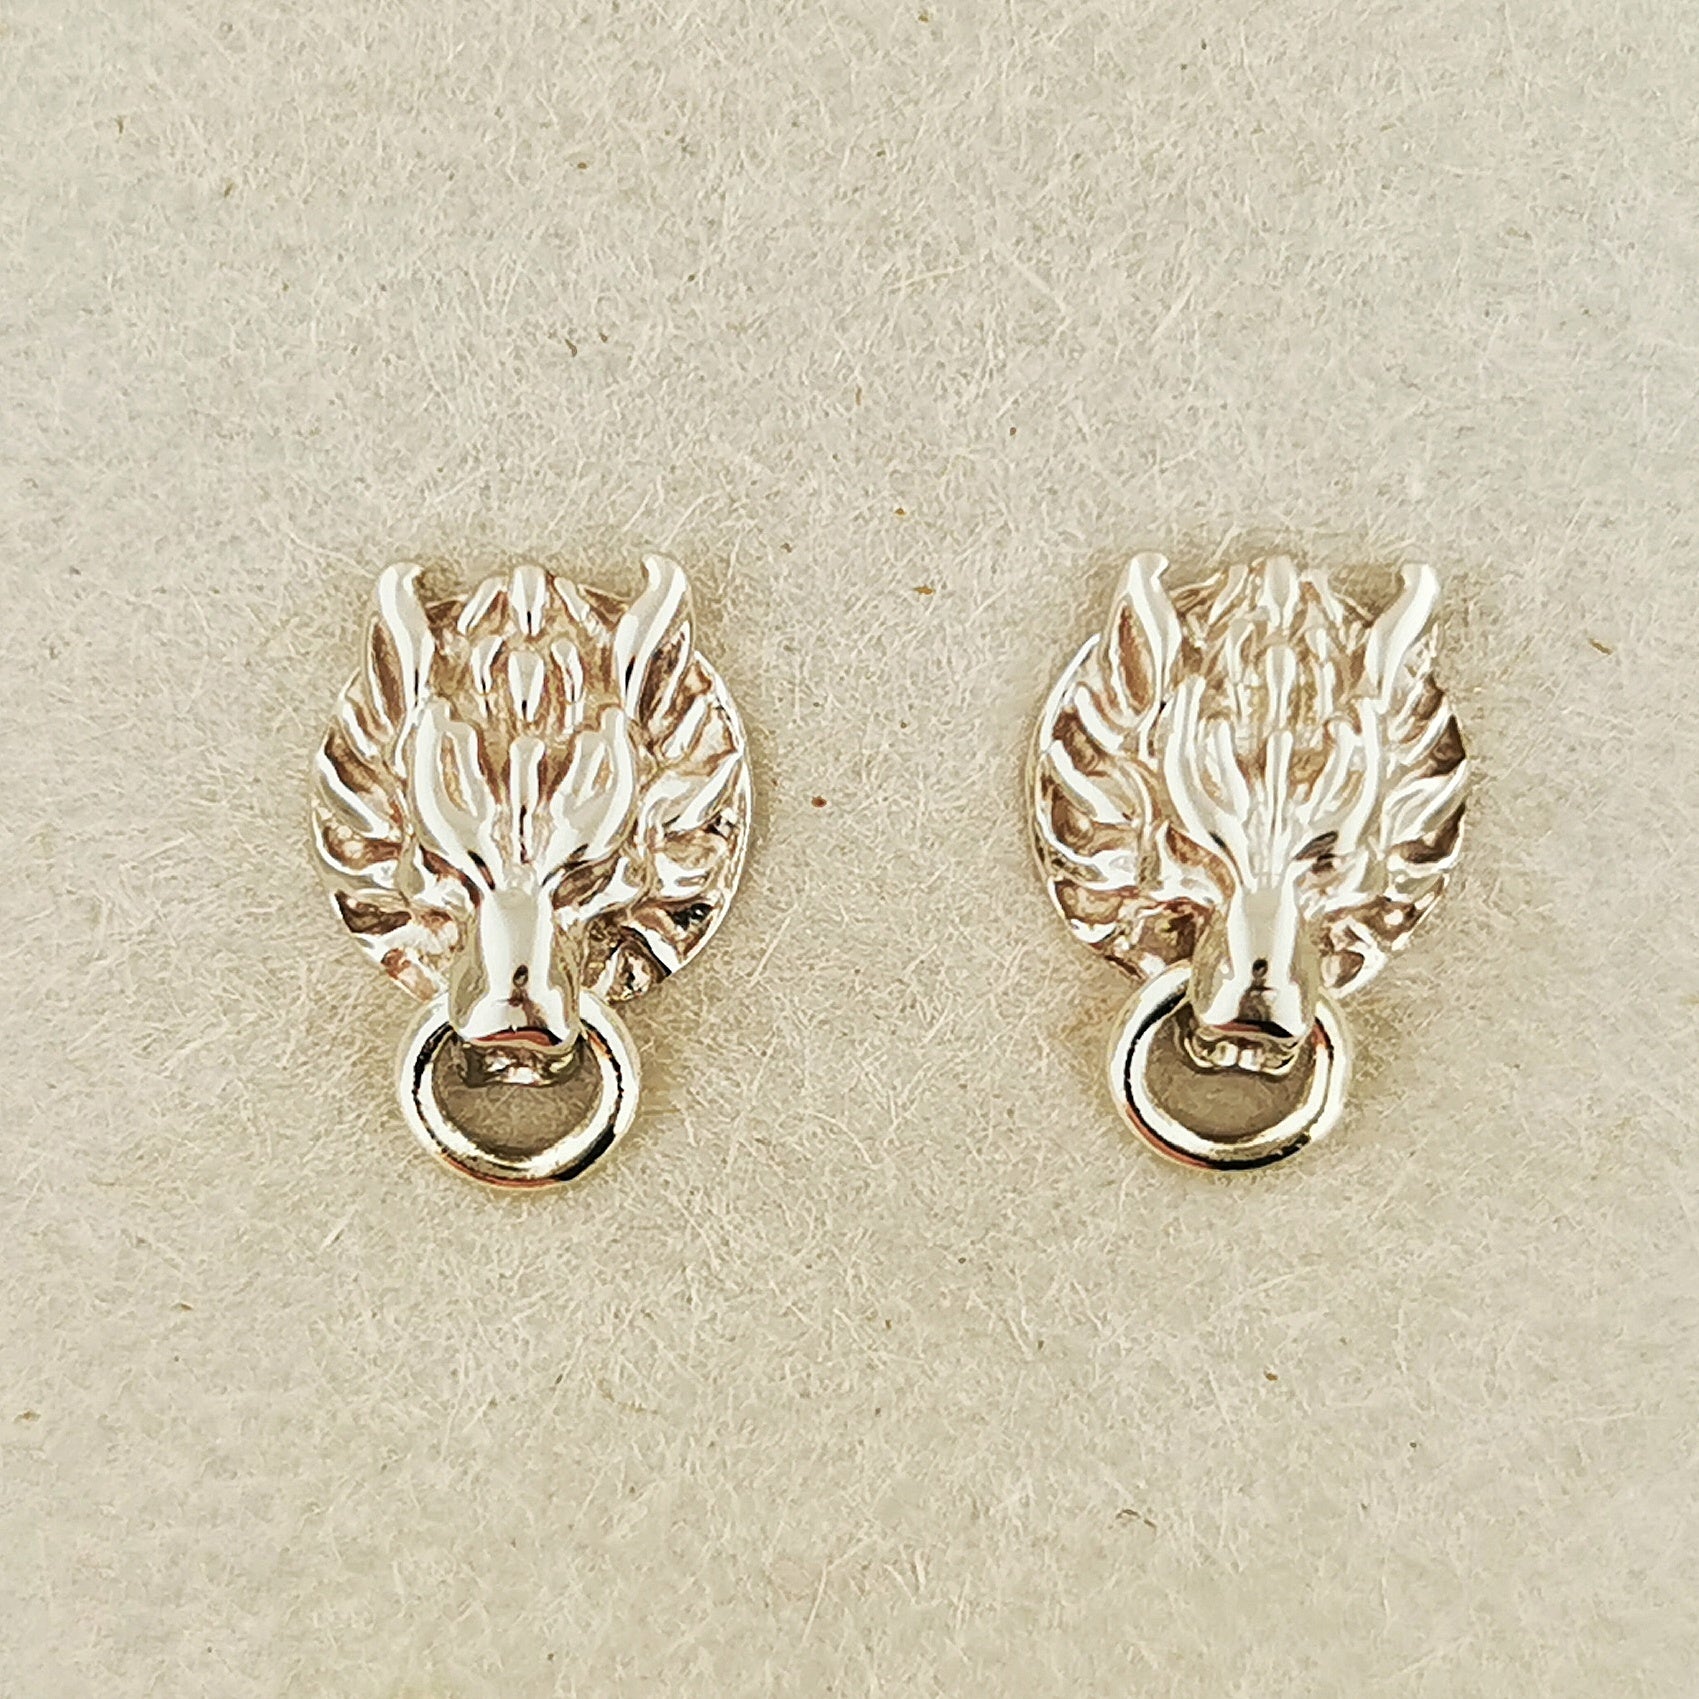 White Gold FF7 Cloud Strife Wolf Stud Earrings, Gold FFVII Cloud Strife Wolf Stud Earrings, Final Fantasy Earrings, Gold FFVII Fenrir Wolf Stud Earrings, Gold Final Fantasy Earrings, Final Fantasy Jewelry, Gamer Girl Jewelry, Gold Gamer Girl Earrings, white gold stud earrings